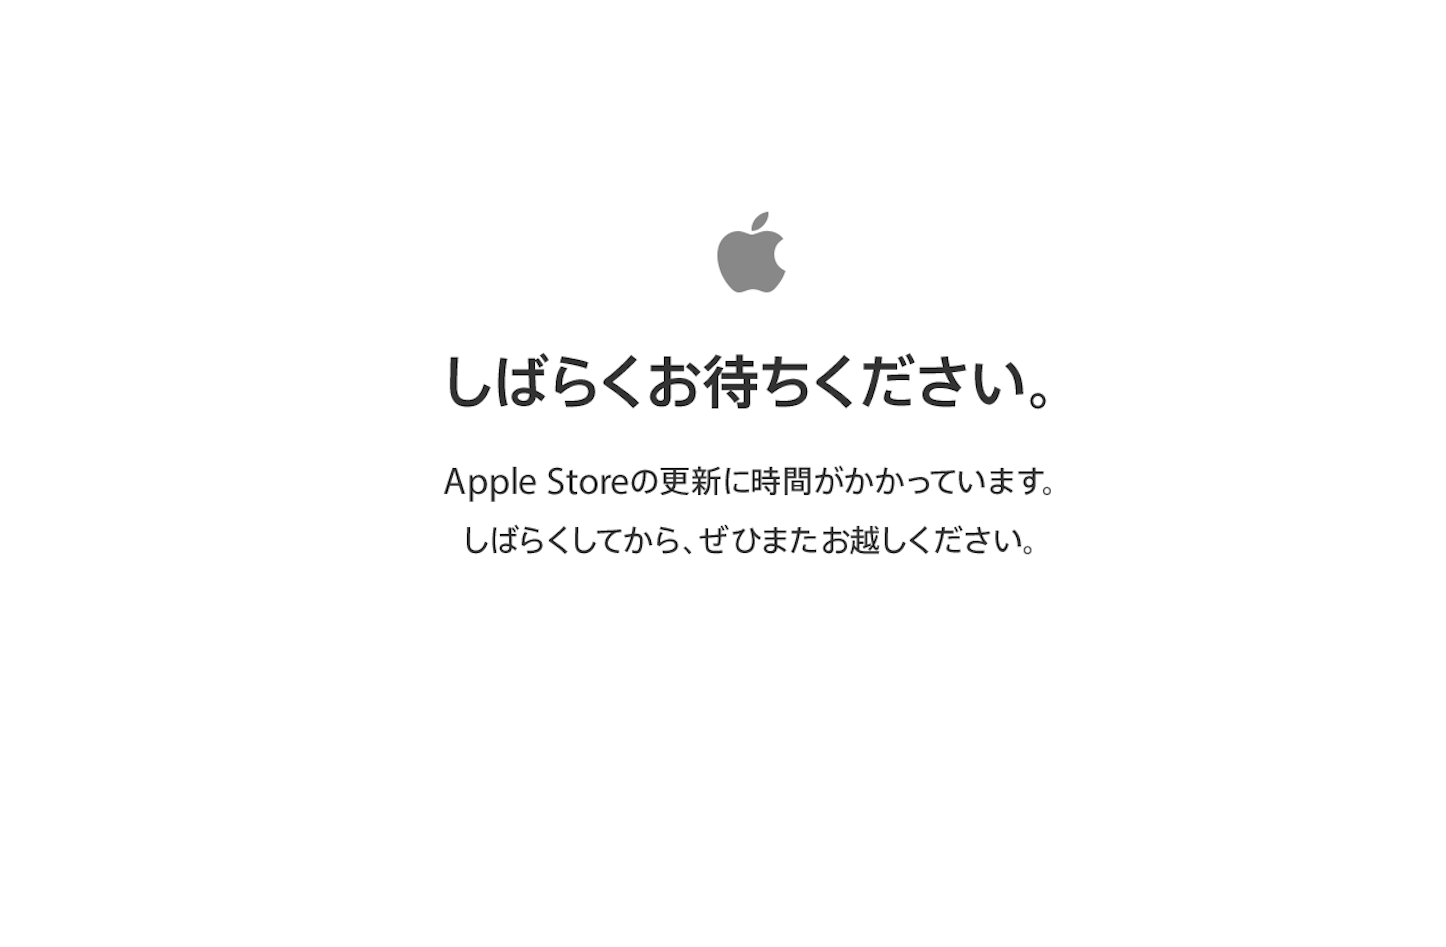 Apple-Is-Down-for-Maintenance-jp